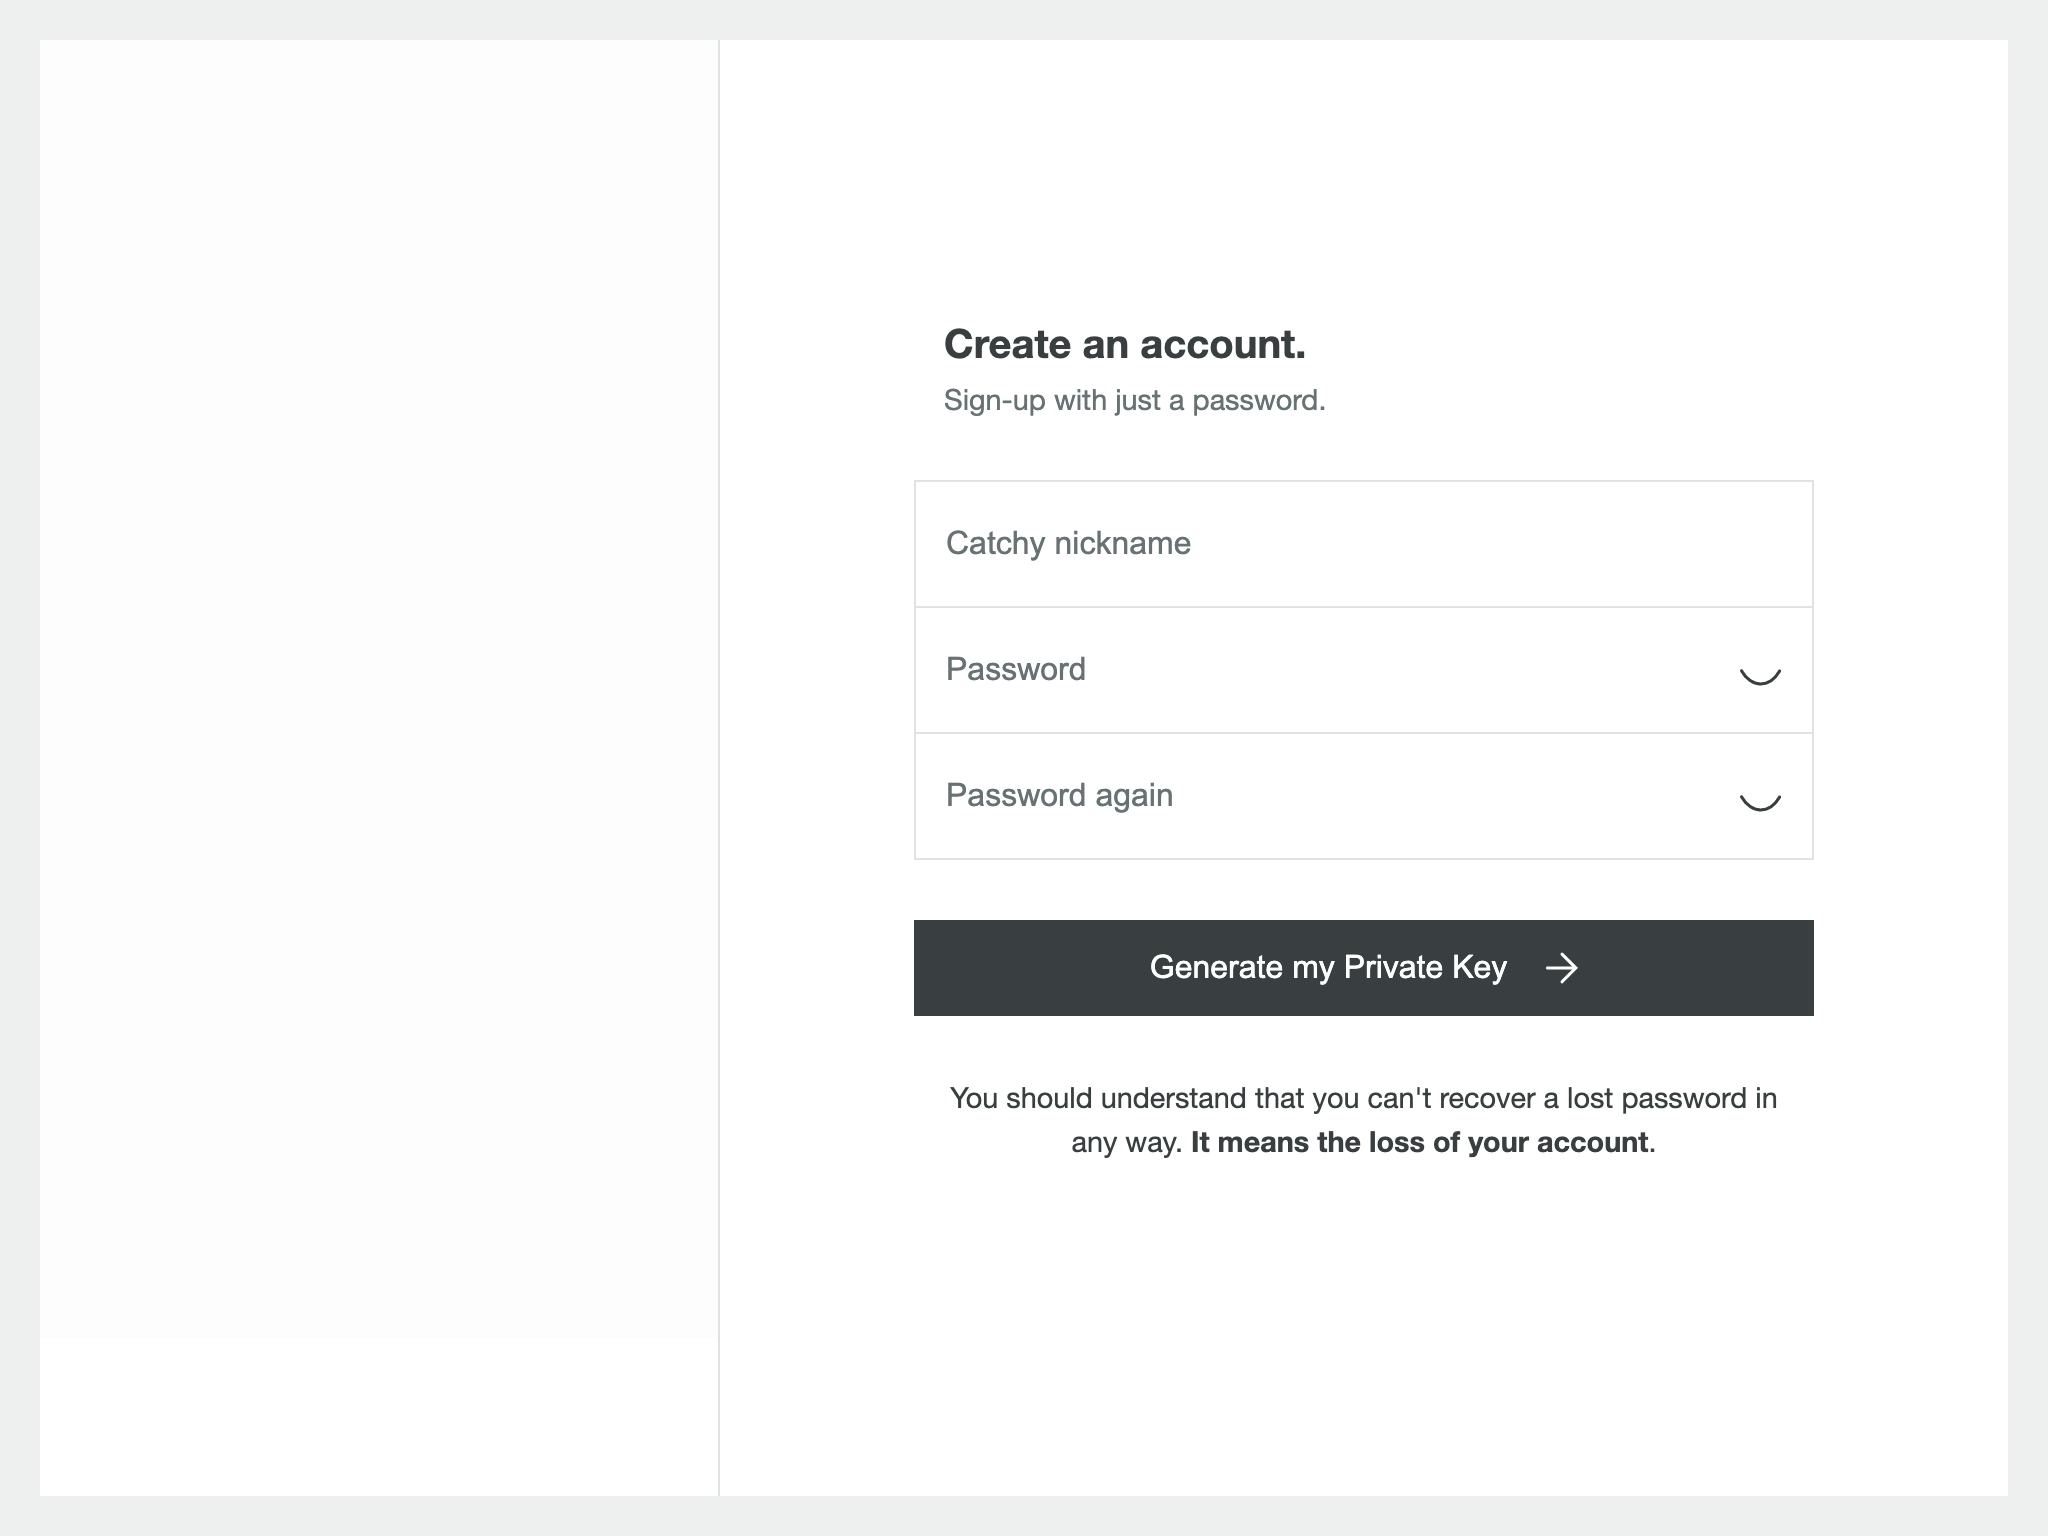 Transmission's Sign Up with just a password